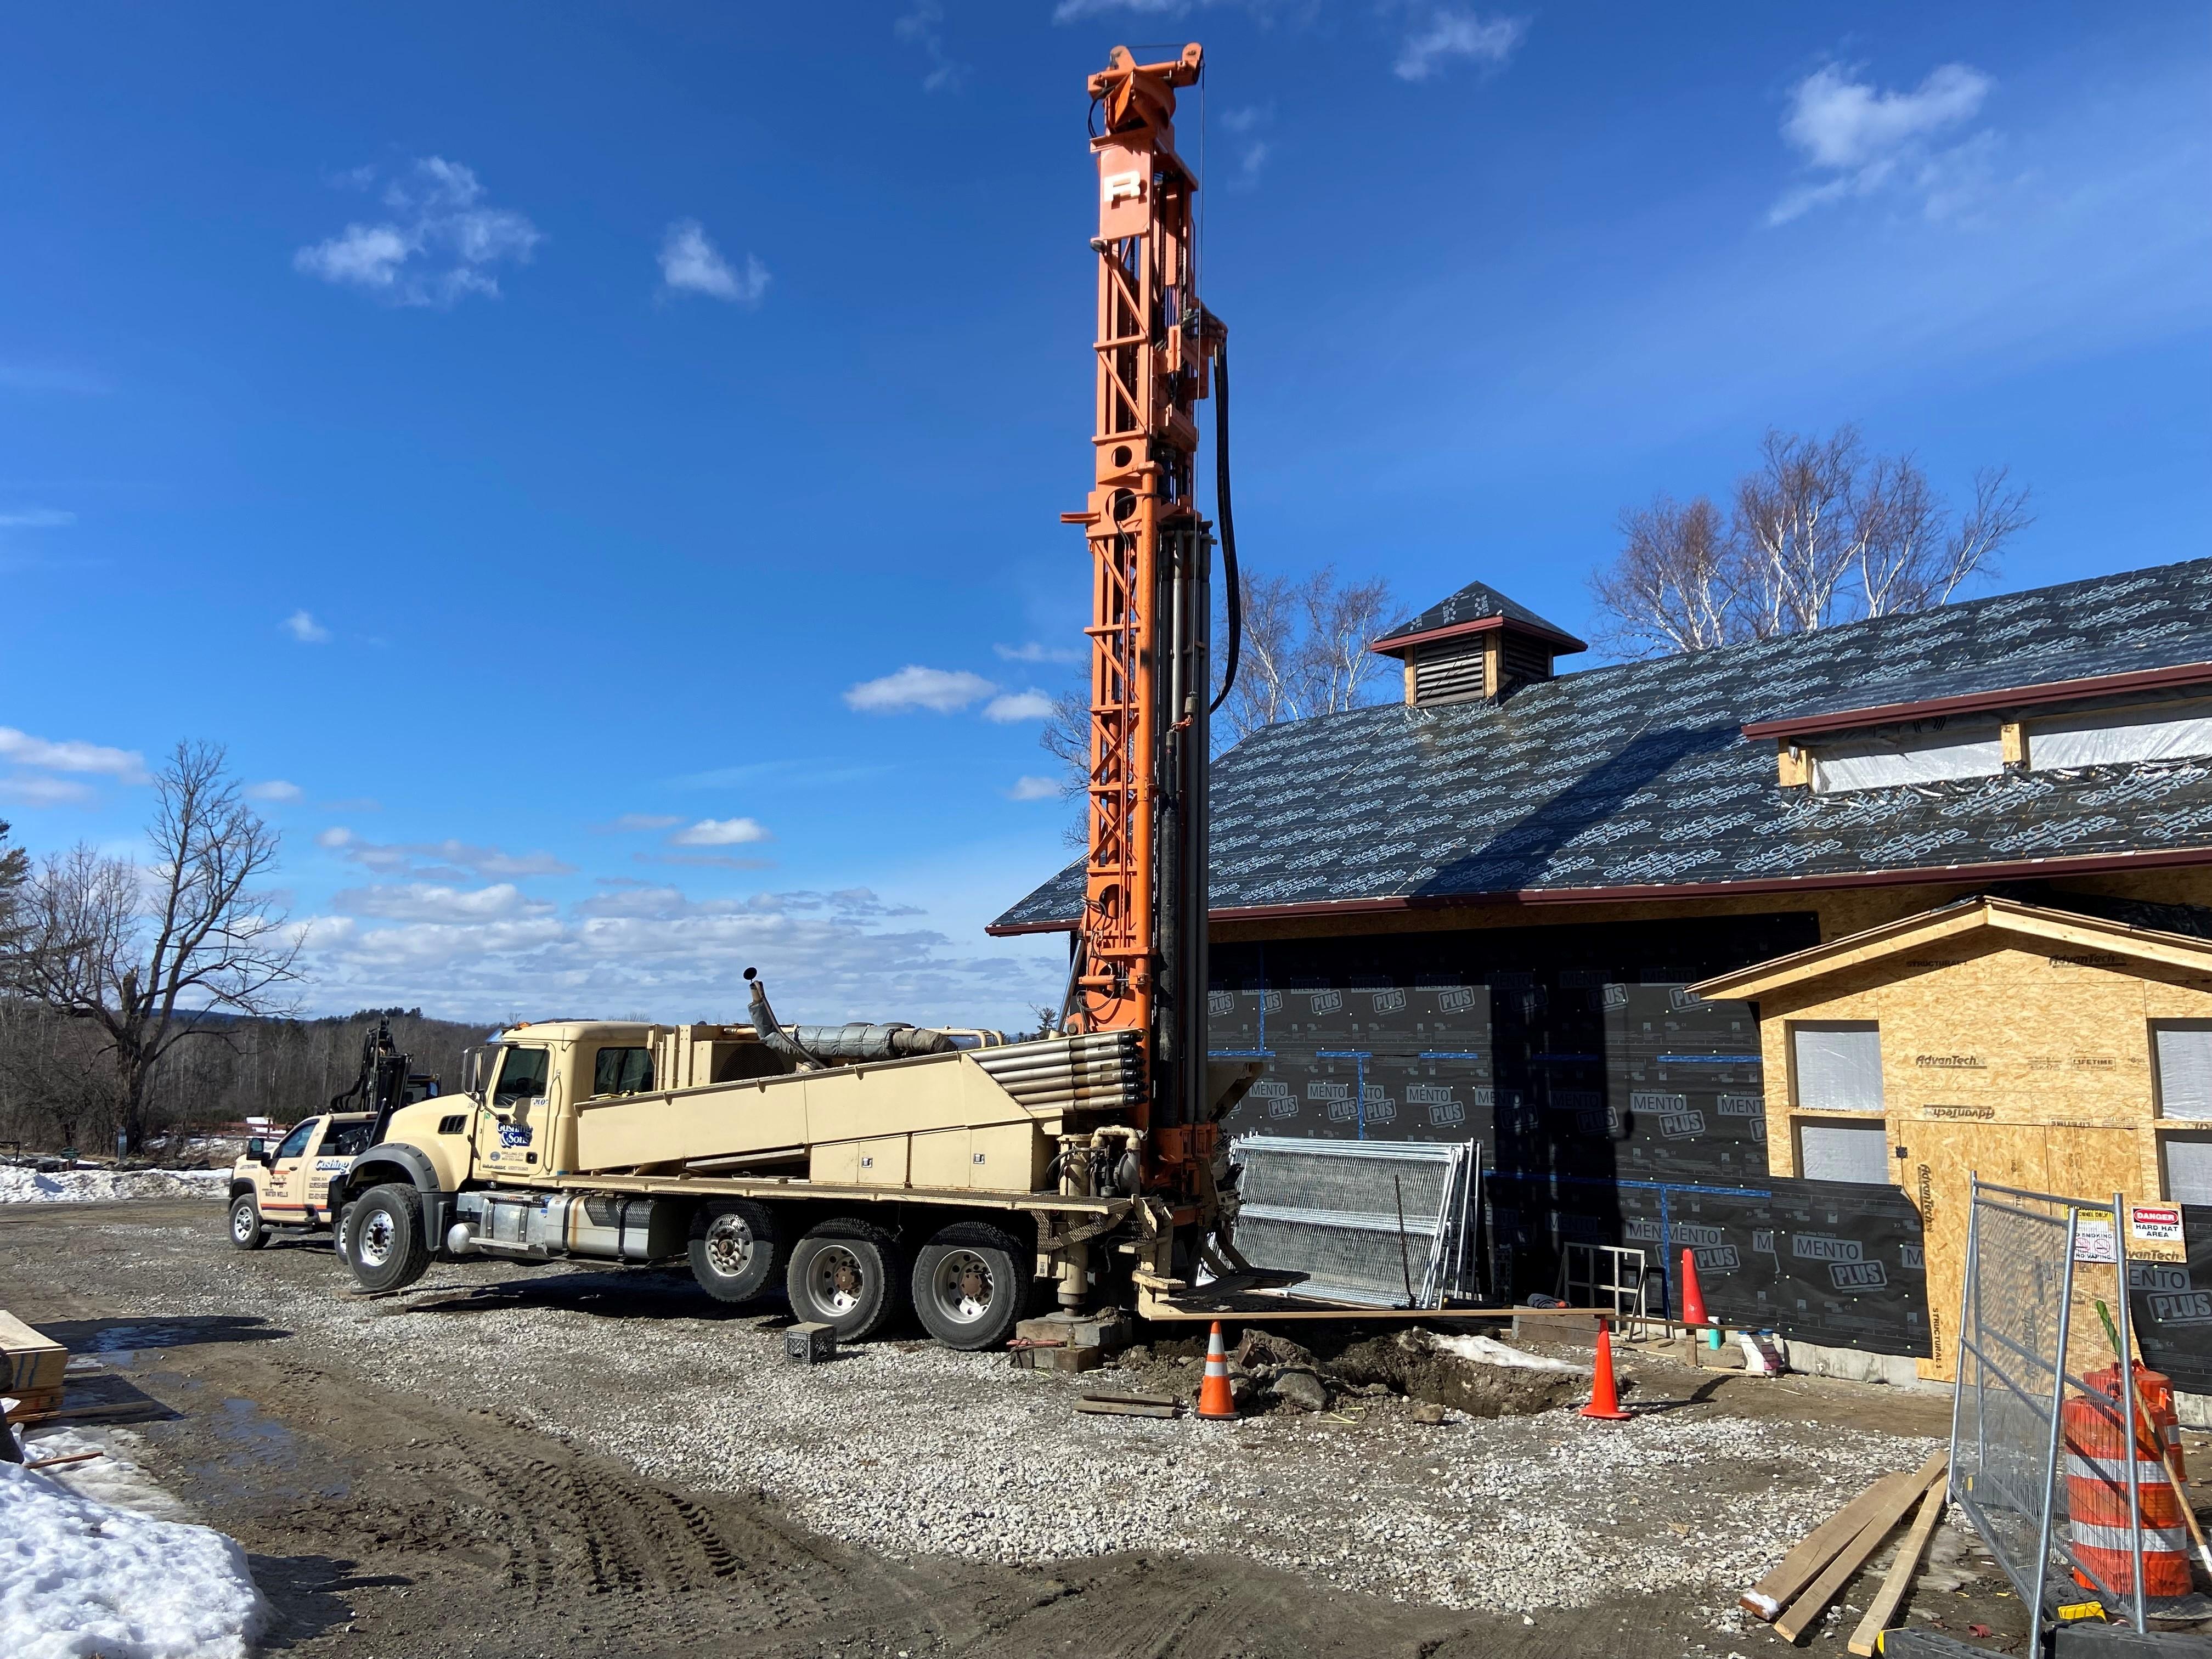 Wells being drilled to create the geothermal system at The Rocks.